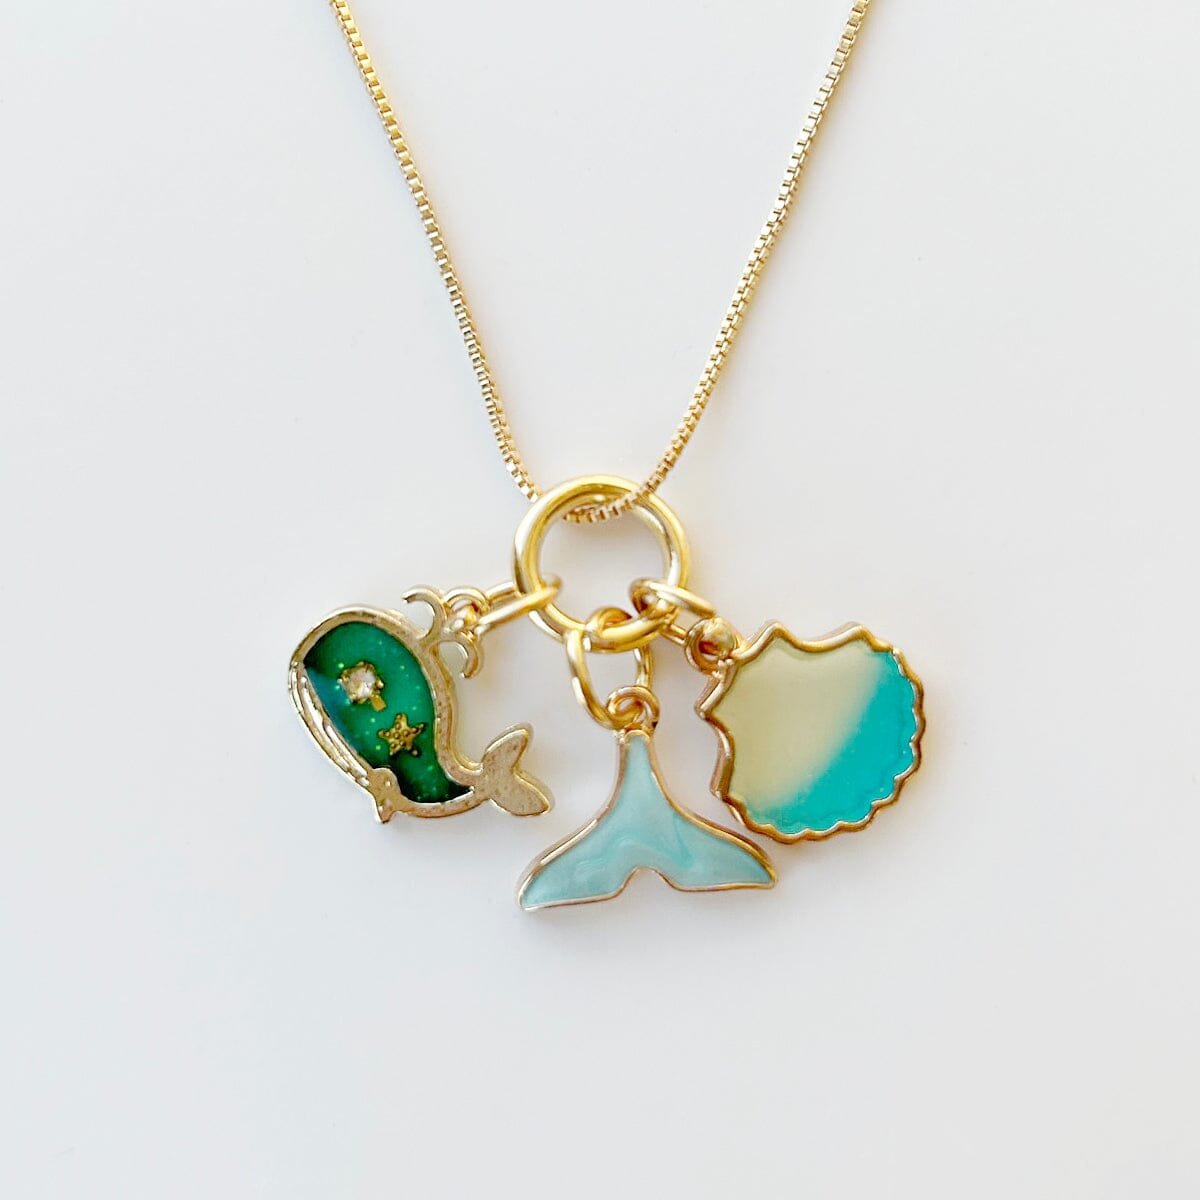 Whale, Tail & Shell Charm Necklace